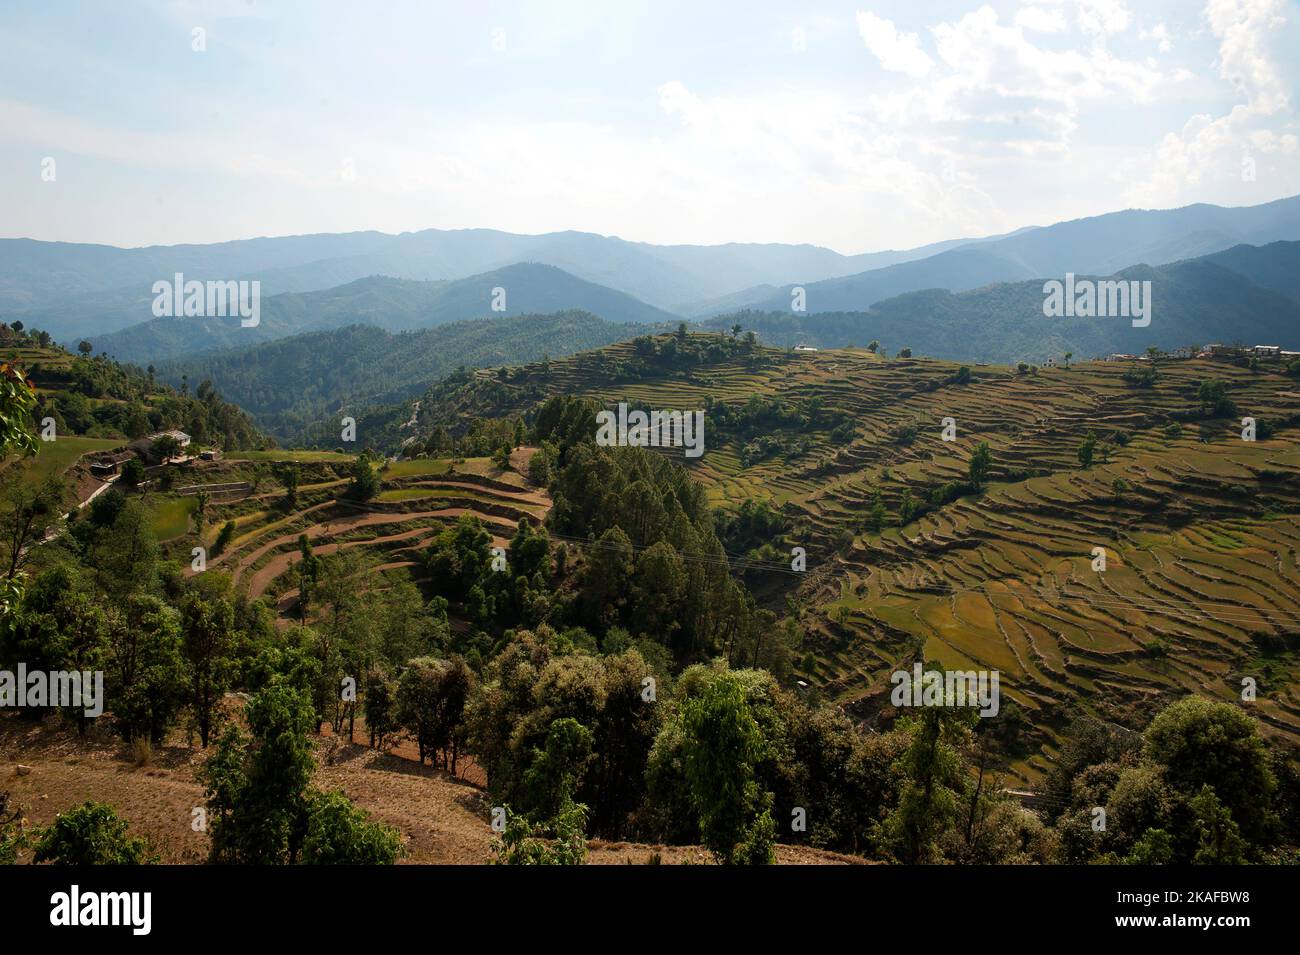 Typical terraced fields used in villages on the Kumaon hills, Uttarakhand, northern India Stock Photo